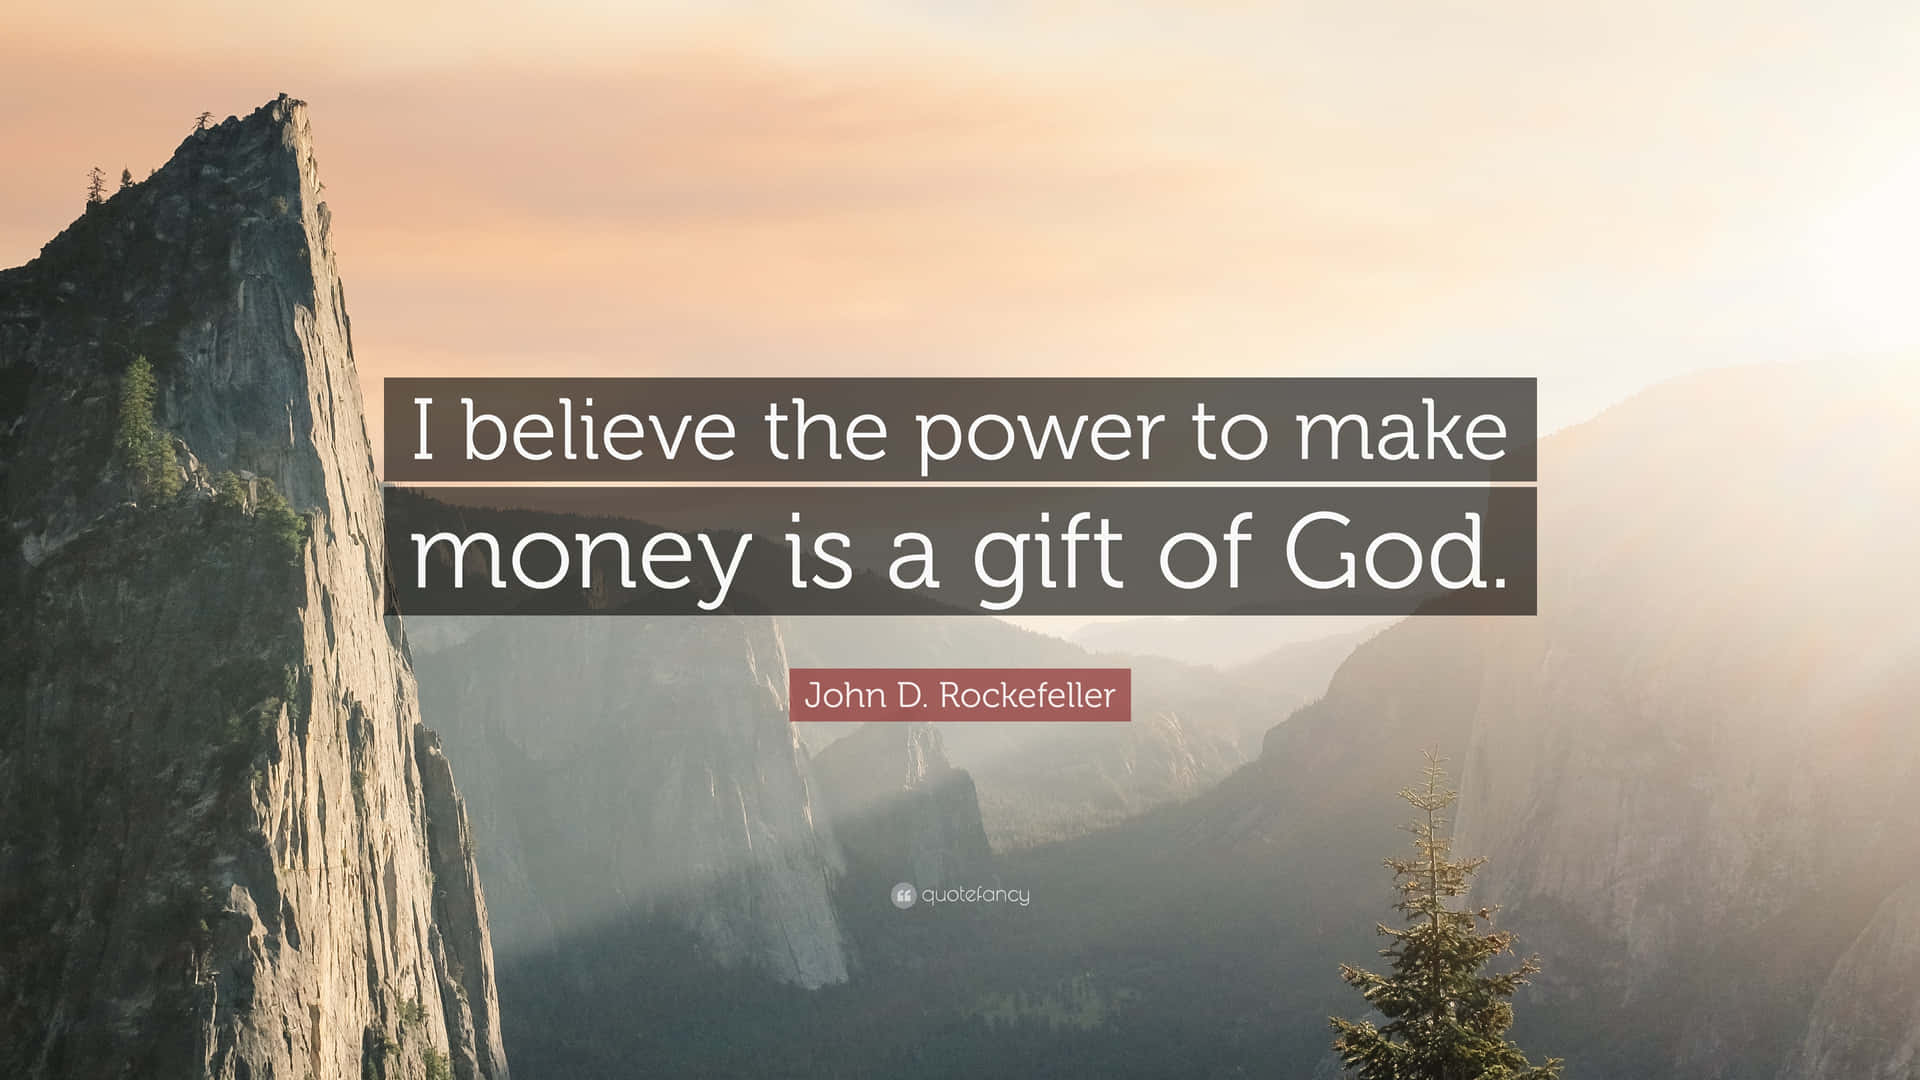 A Quote That Says I Believe The Power To Make Money Is A Gift Of God Wallpaper